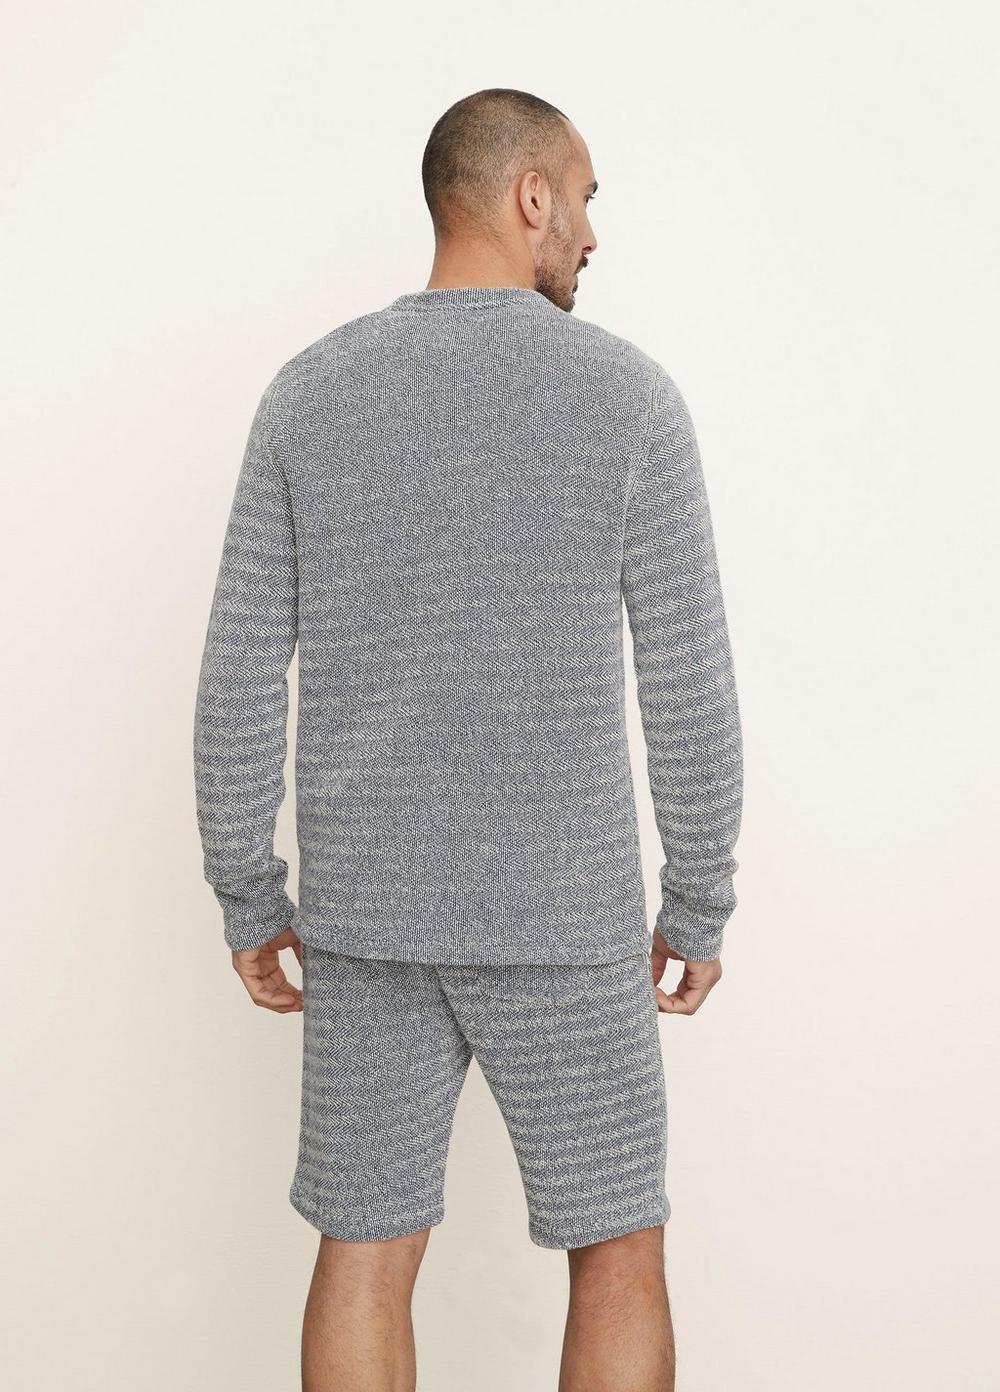 Loose Knit French Terry Long Sleeve Crew